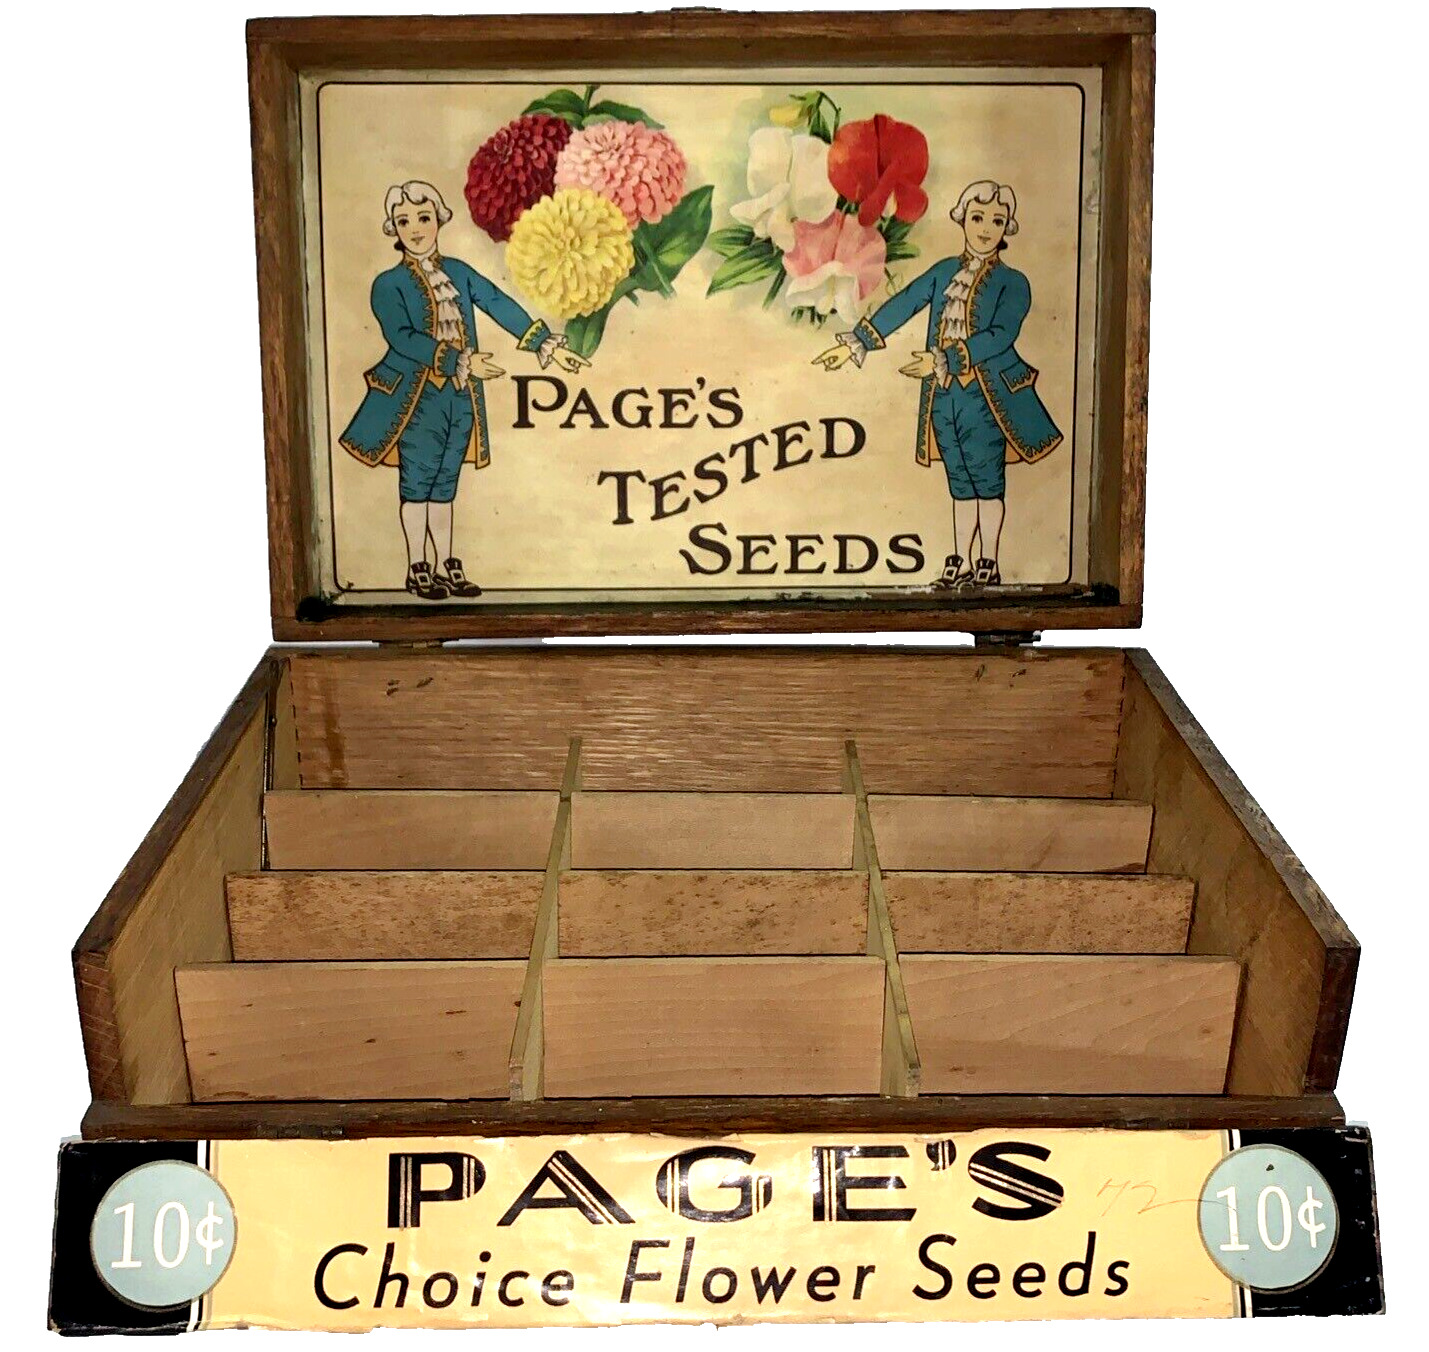 Antique Page's Tested Seed Counter Display Box - Rare Flower Seed Box